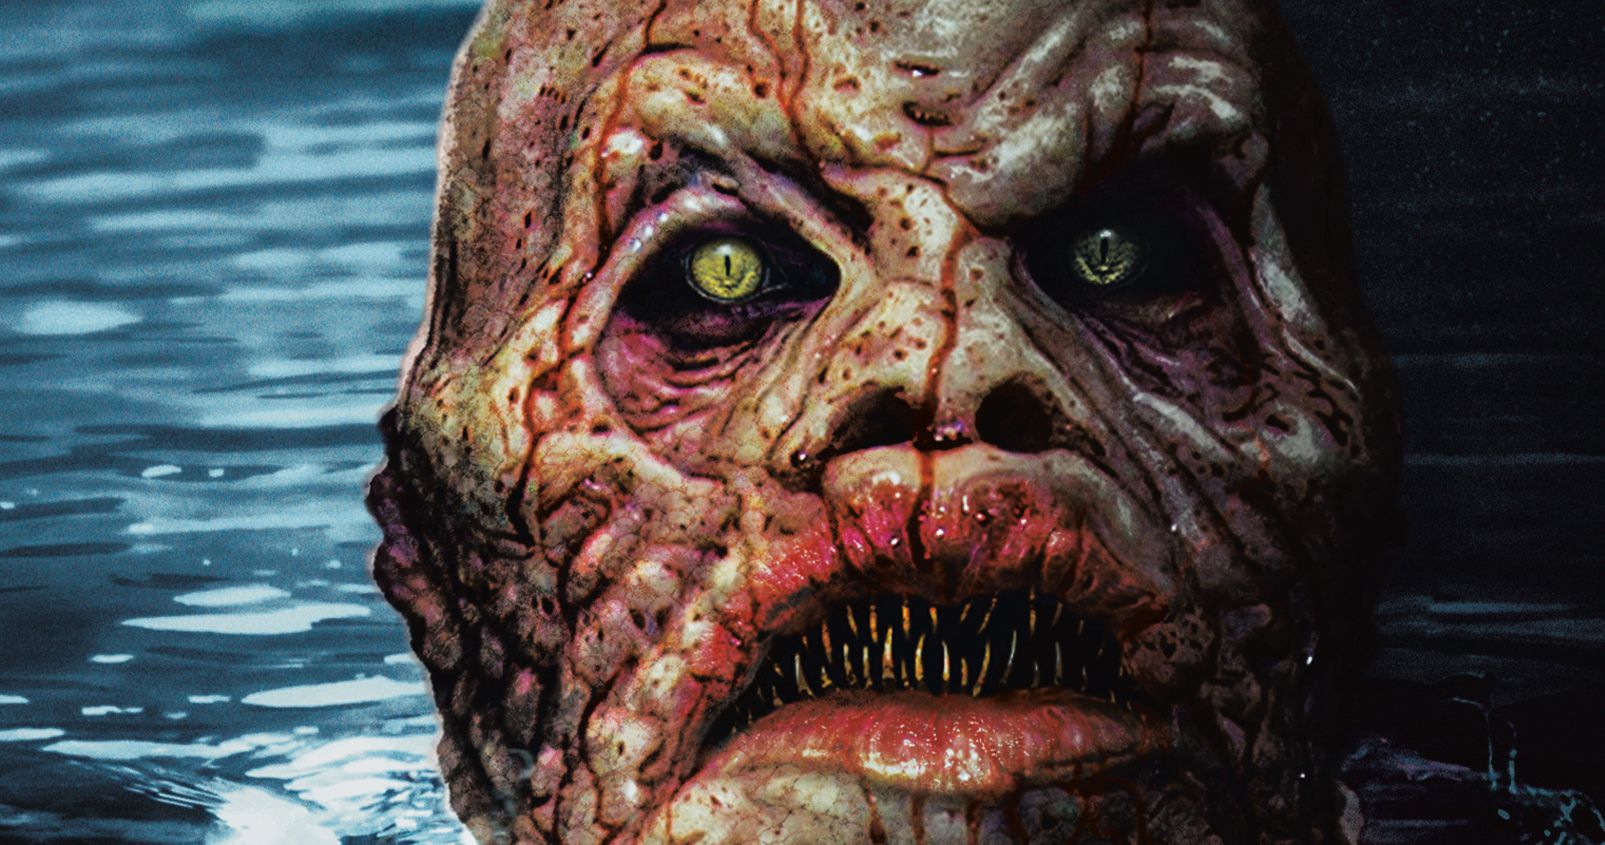 The Barge People Trailer: Flesh-Eating Mutants Are Lurking in the Water